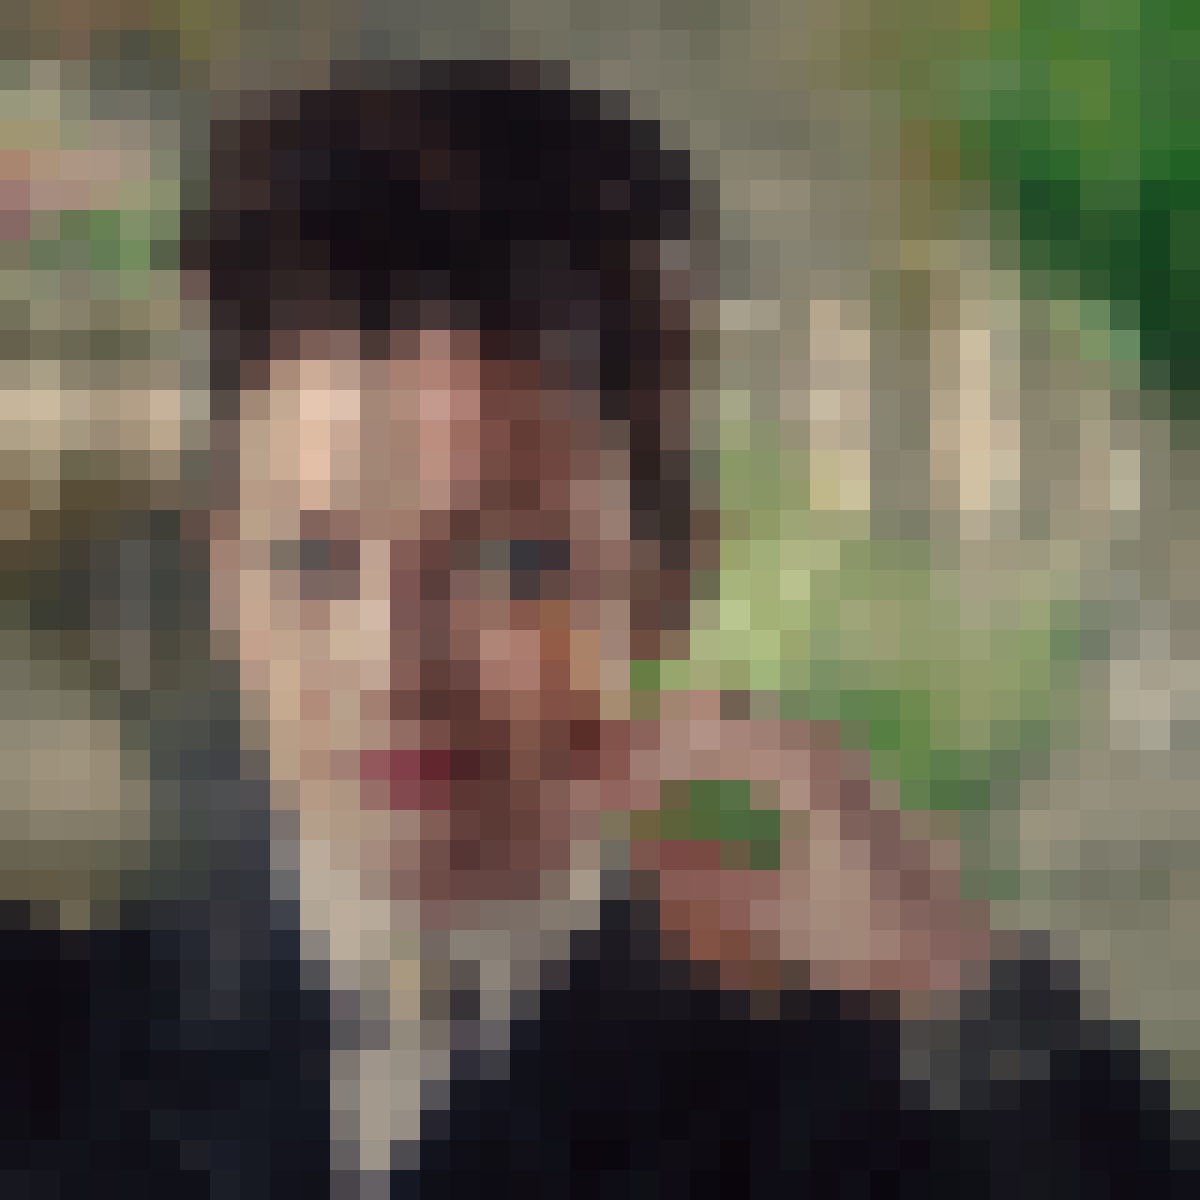 Who Is Missy in Doctor Who?